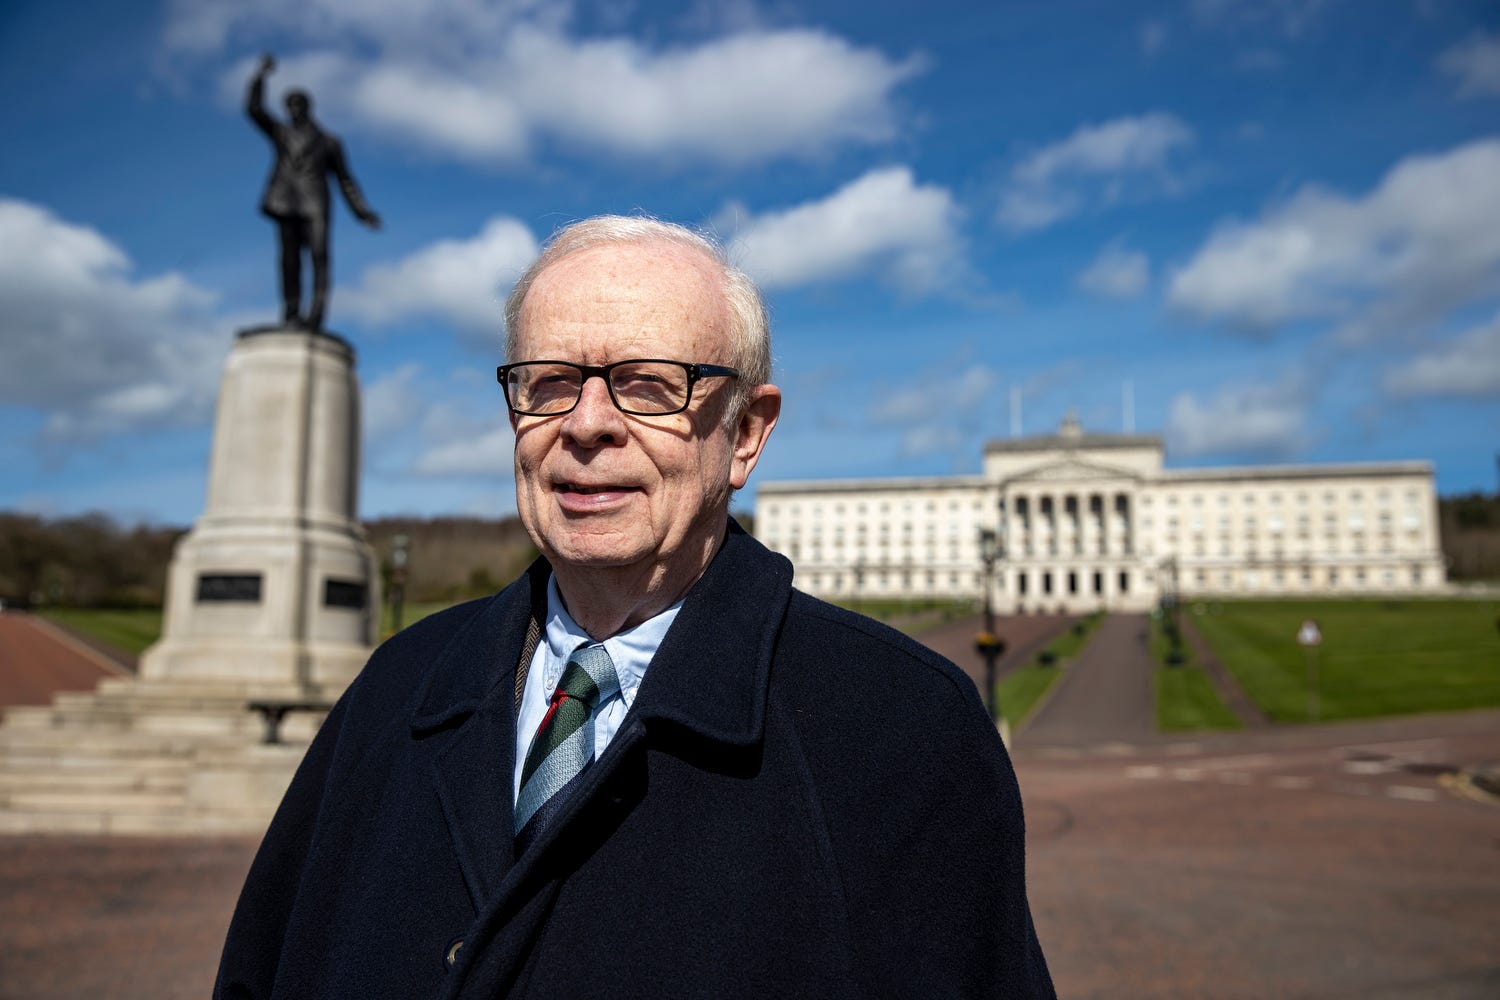 Former Ulster Unionist Party leader Lord Empey at Stormont ahead of the 25th anniversary of the Good Friday Agreement (Liam McBurney/PA)